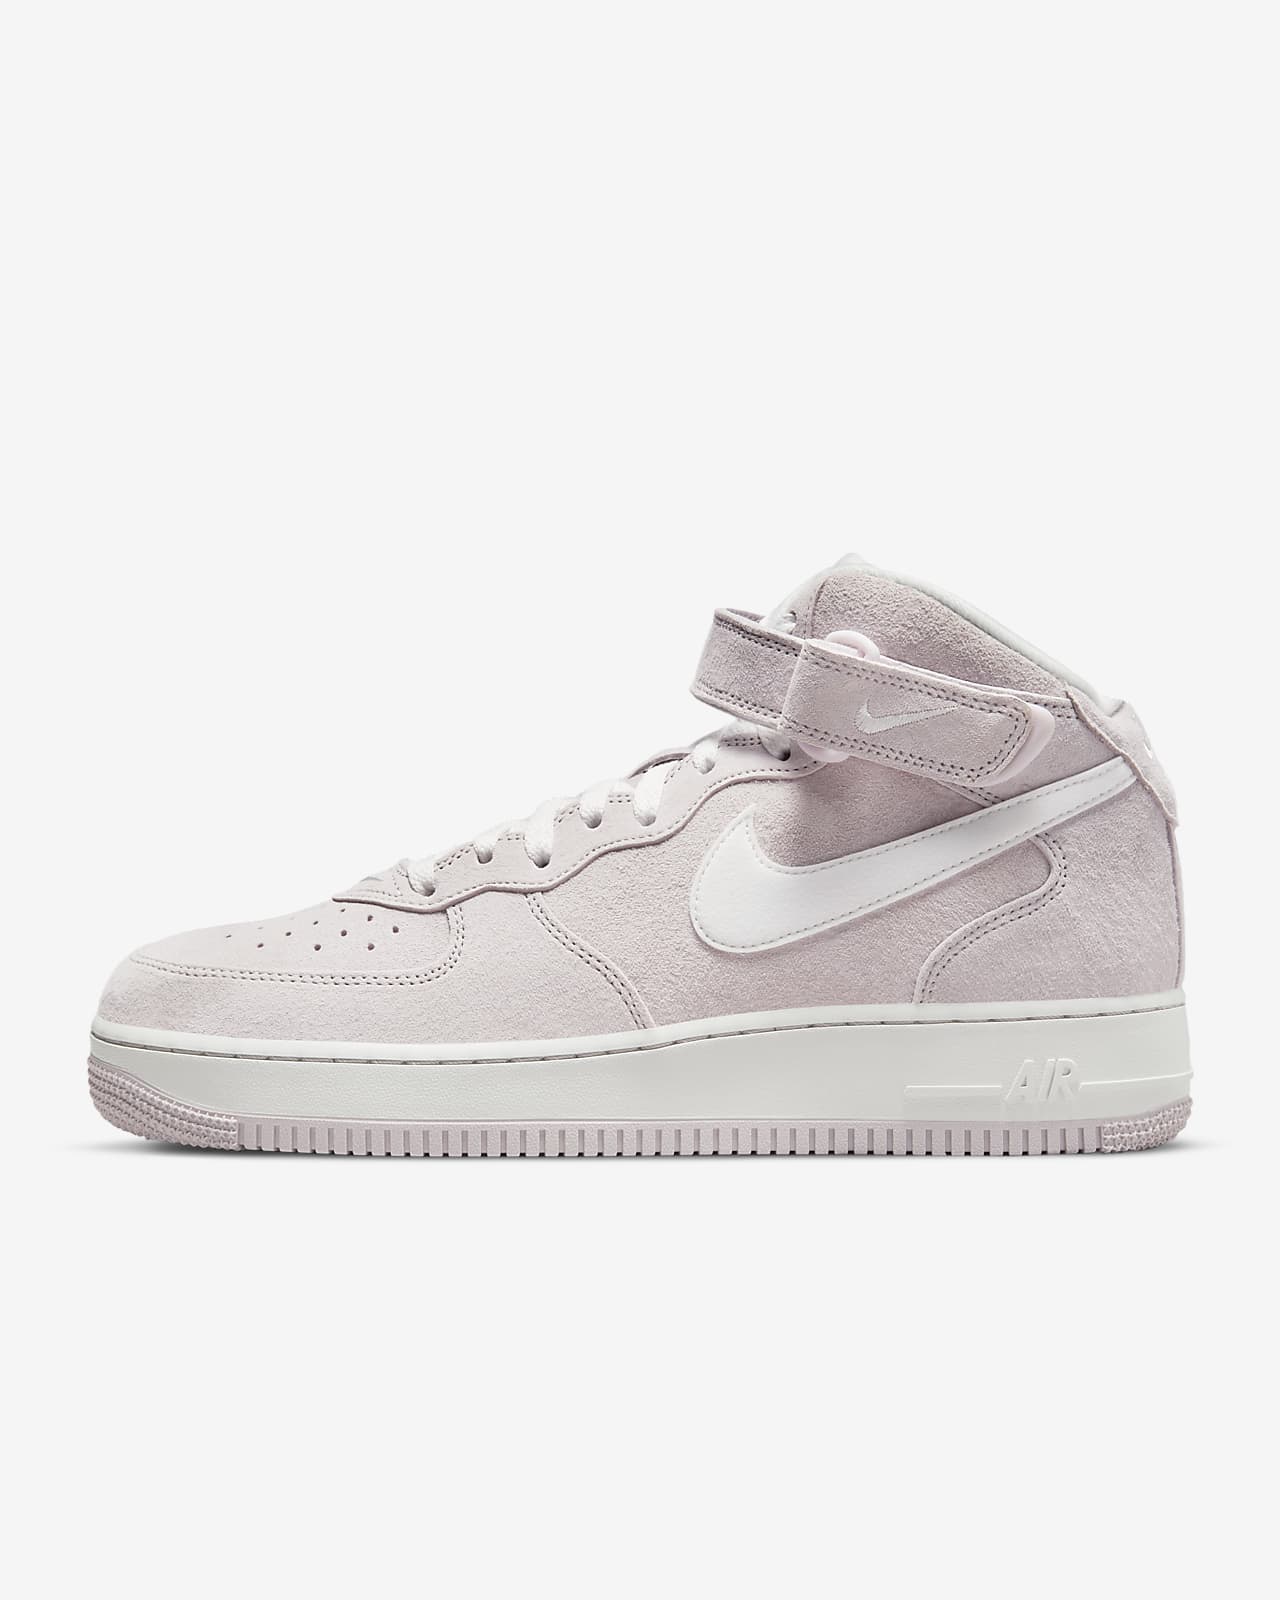 Chaussure Nike Air Force 1 Mid '07 QS pour Homme